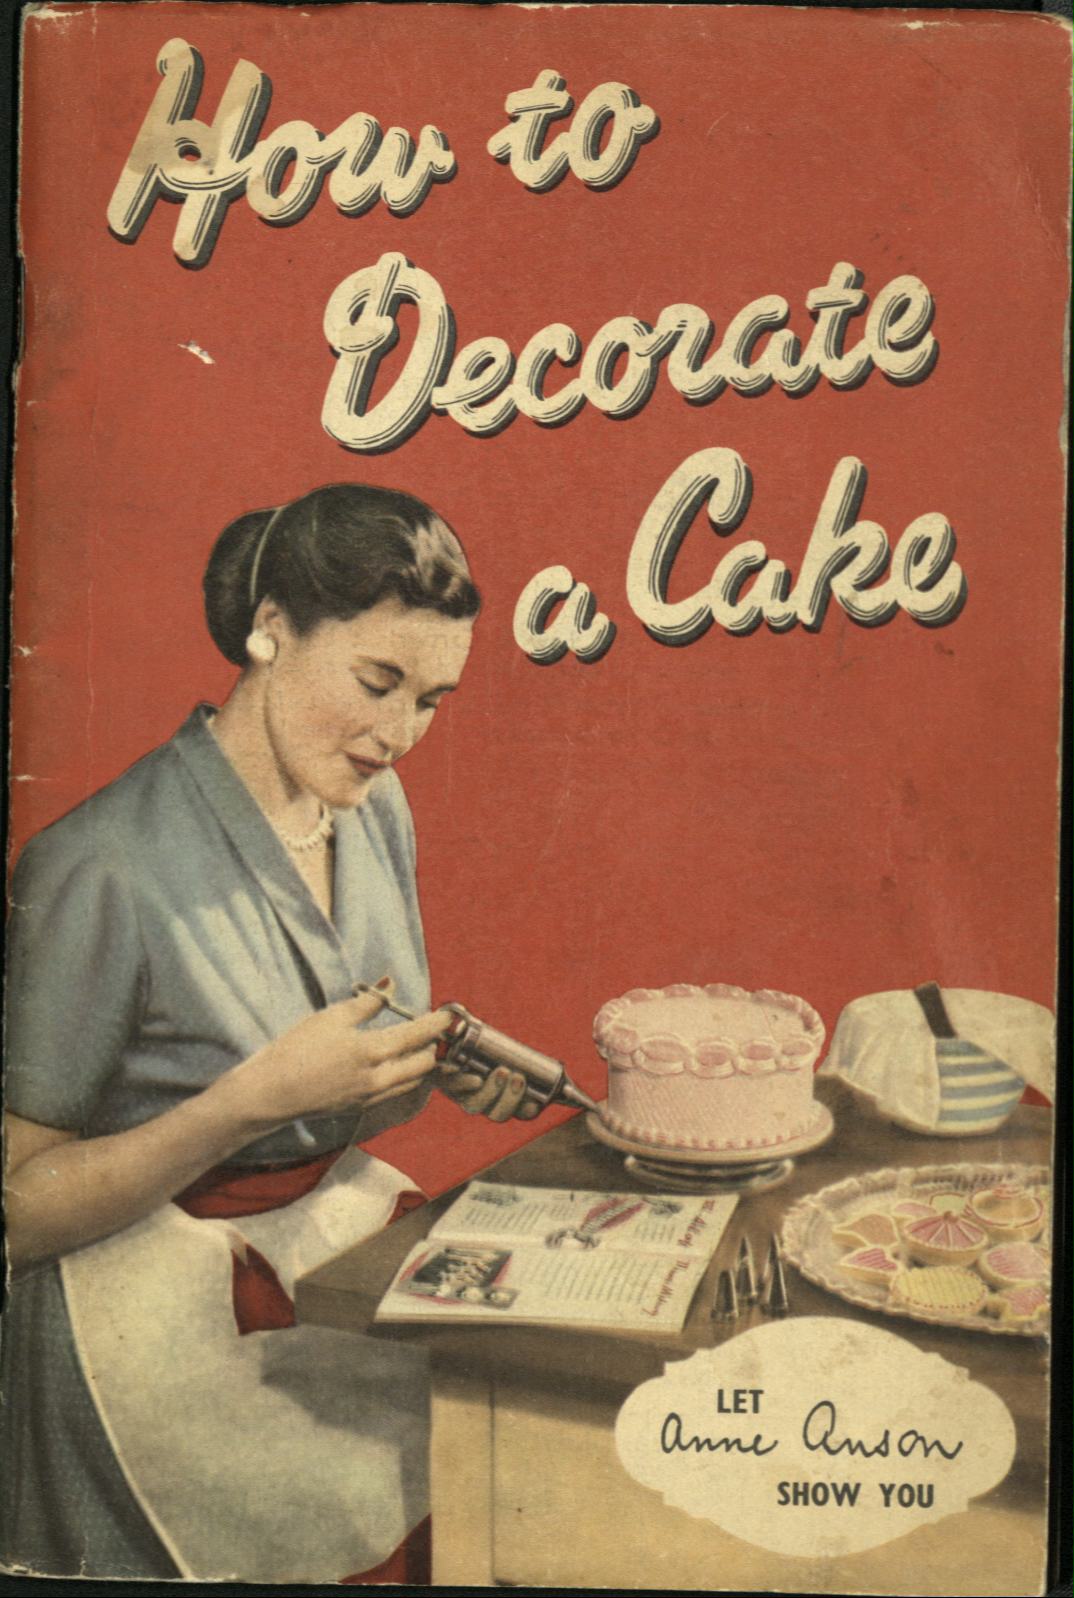 Cover of How to Decorate a Cake, let Anne Anson show you.